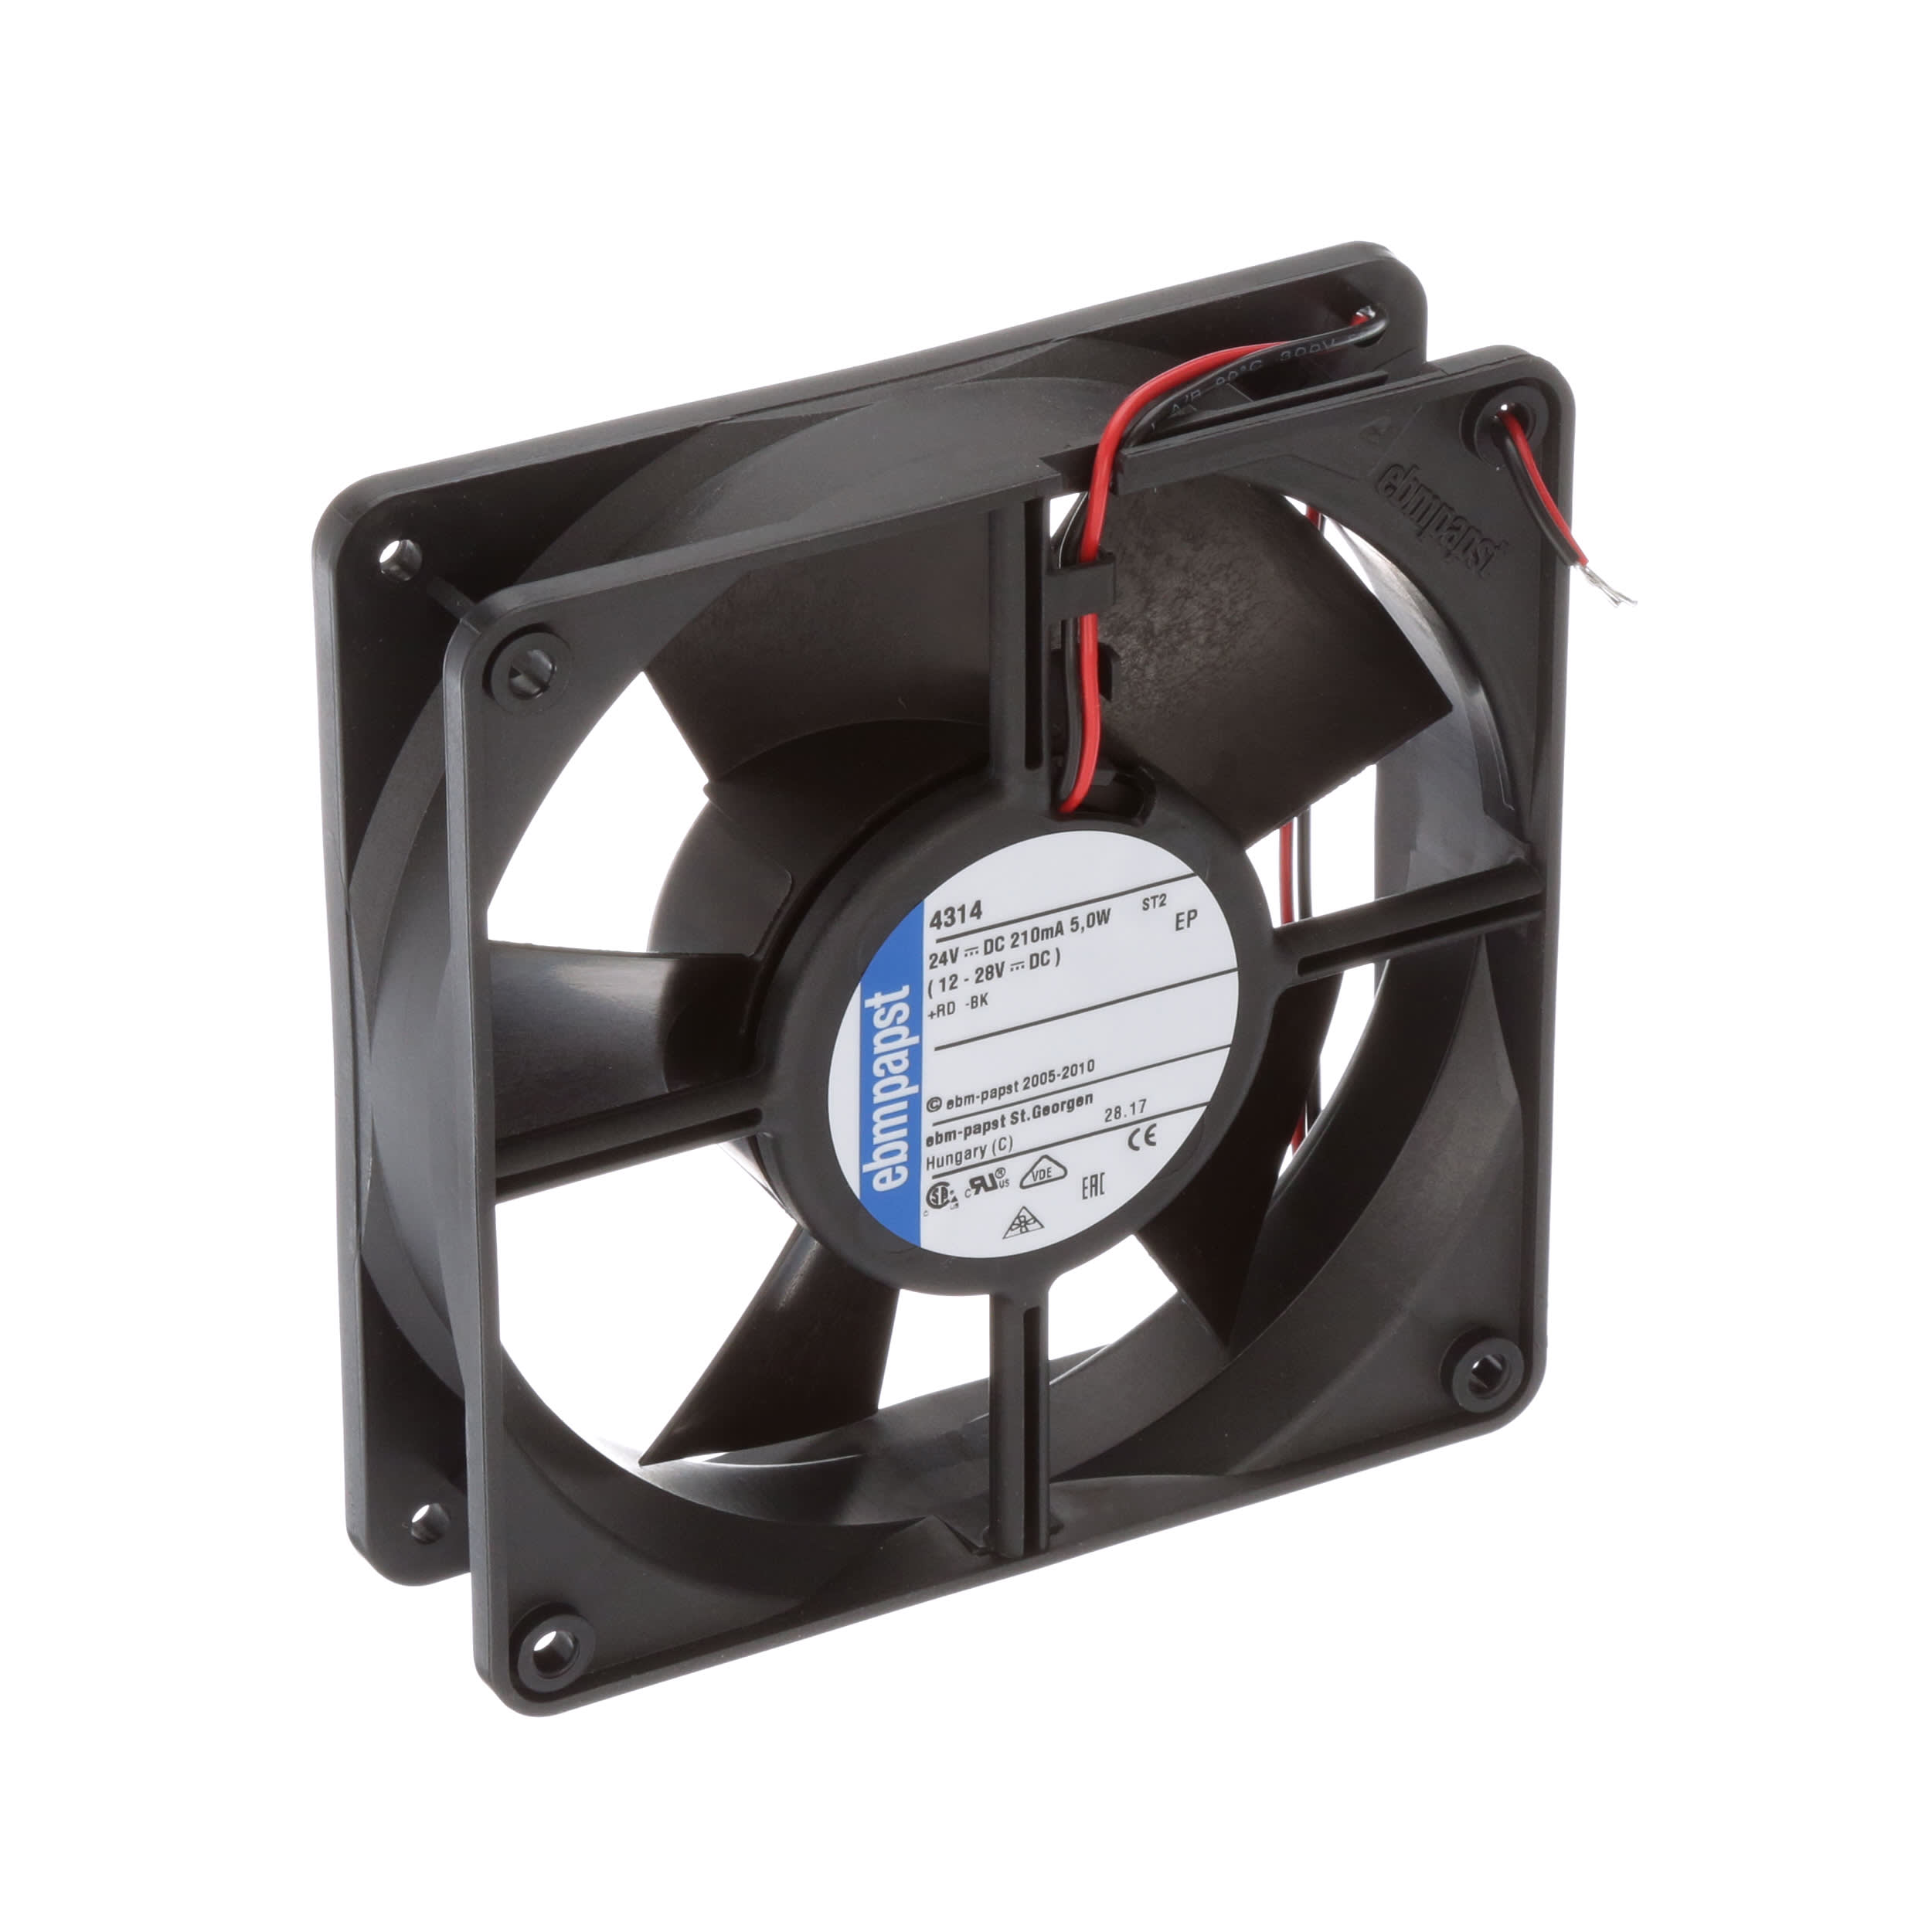 for PAPST TYP 4314 12032 24V 5W Dual Ball Inverter Fan 2-Wire 